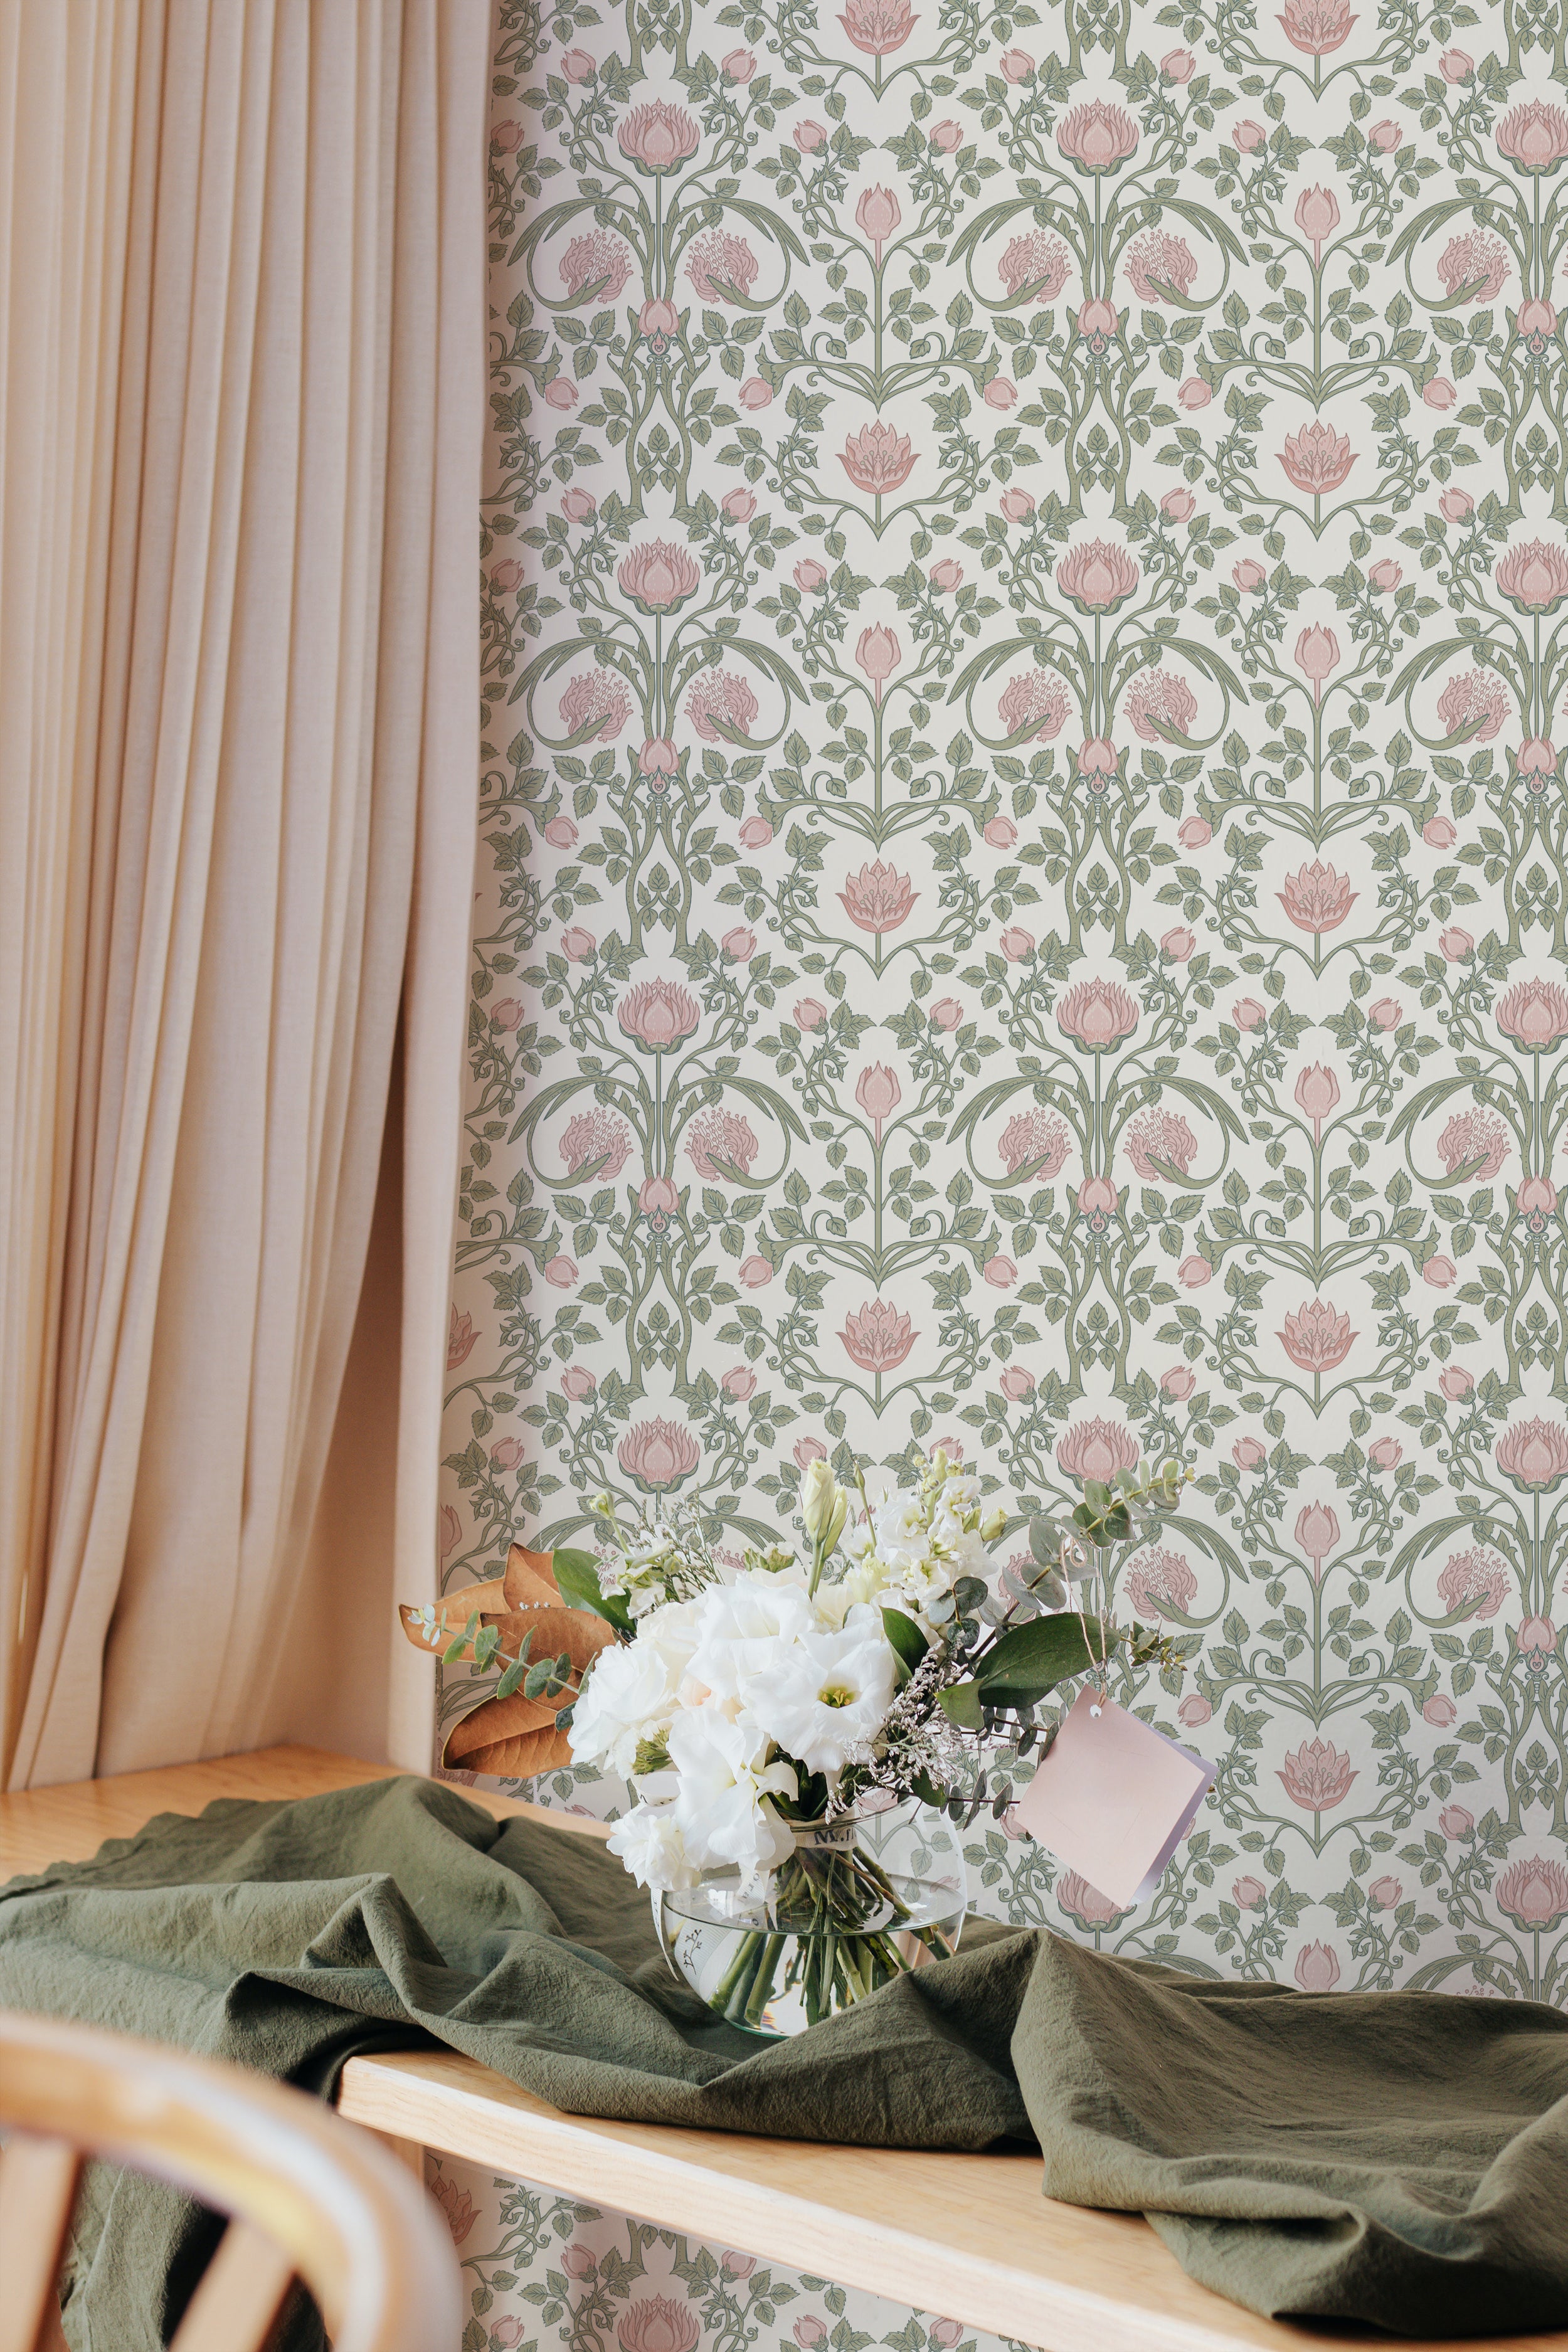 A charming dining area with a wooden table draped with a green cloth, a bouquet of white flowers, and soft drapery, against a wall with pastel floral damask wallpaper.